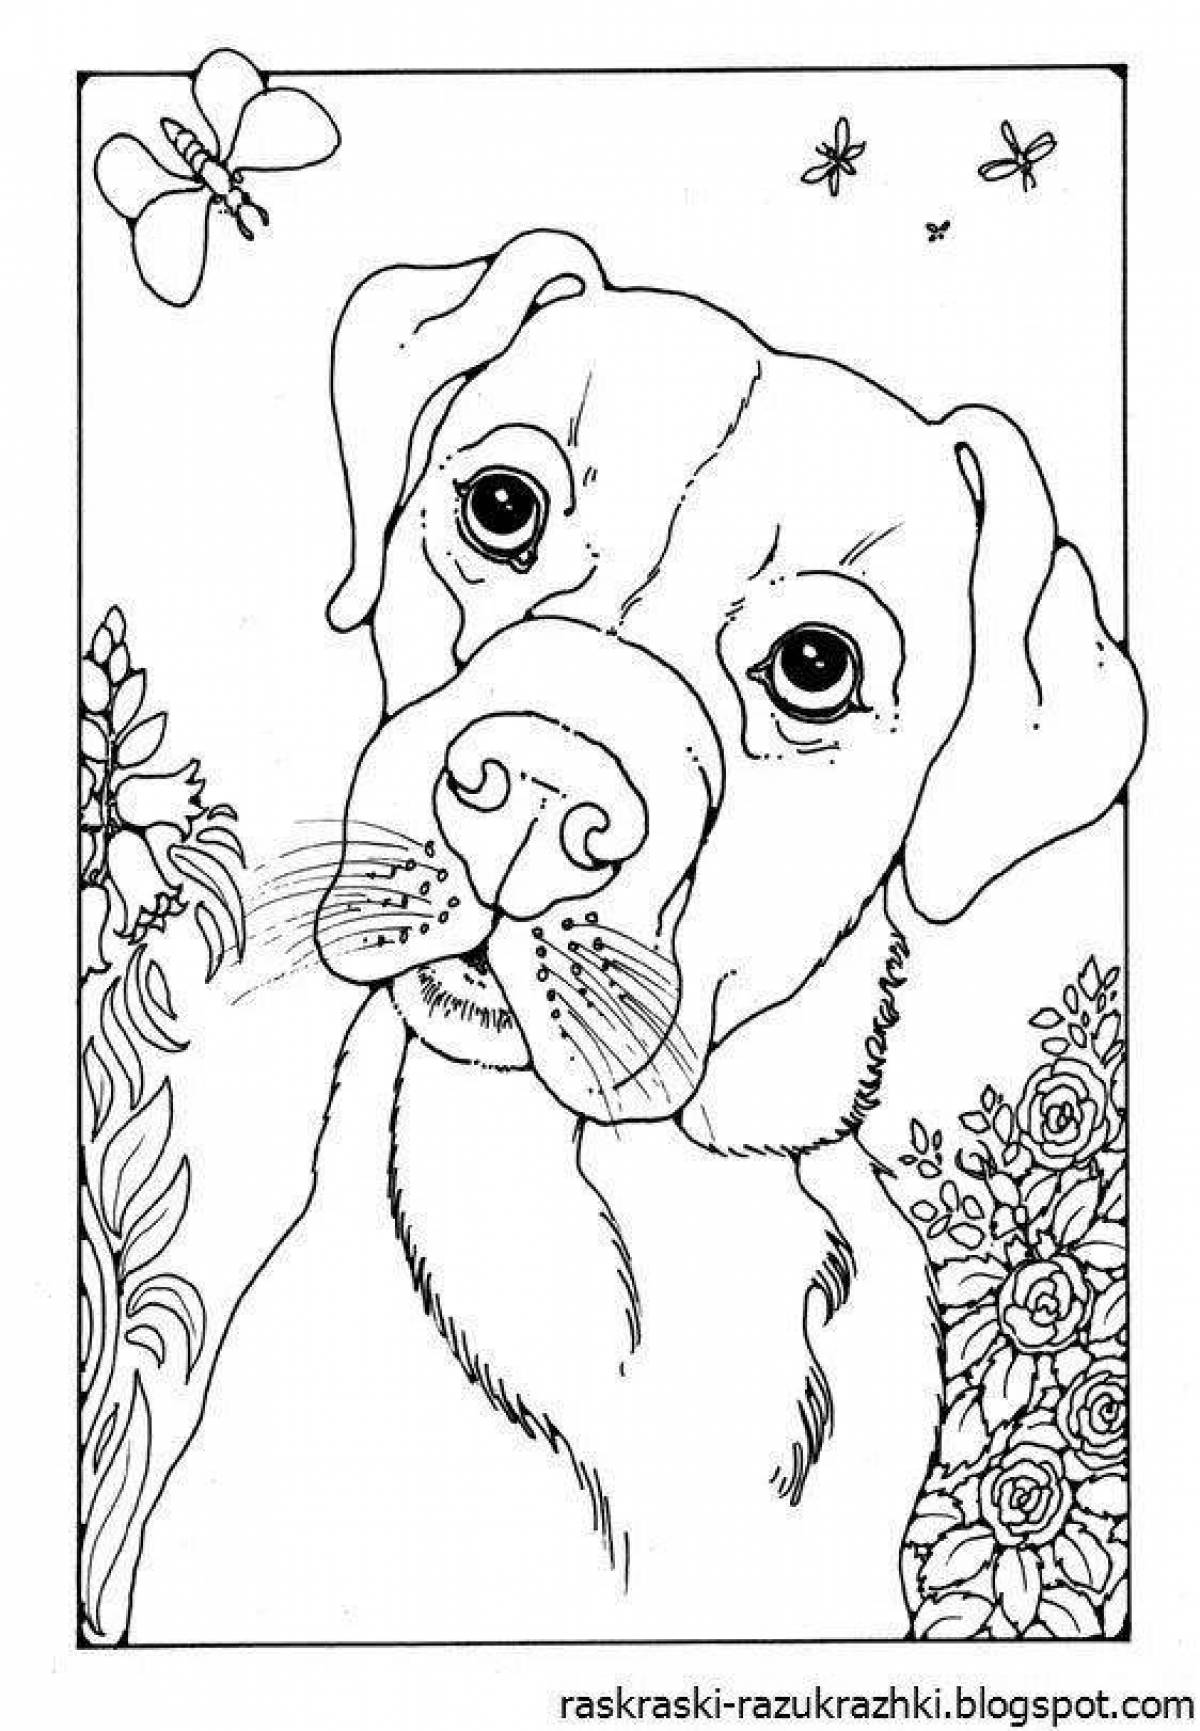 Funny dog ​​coloring by numbers